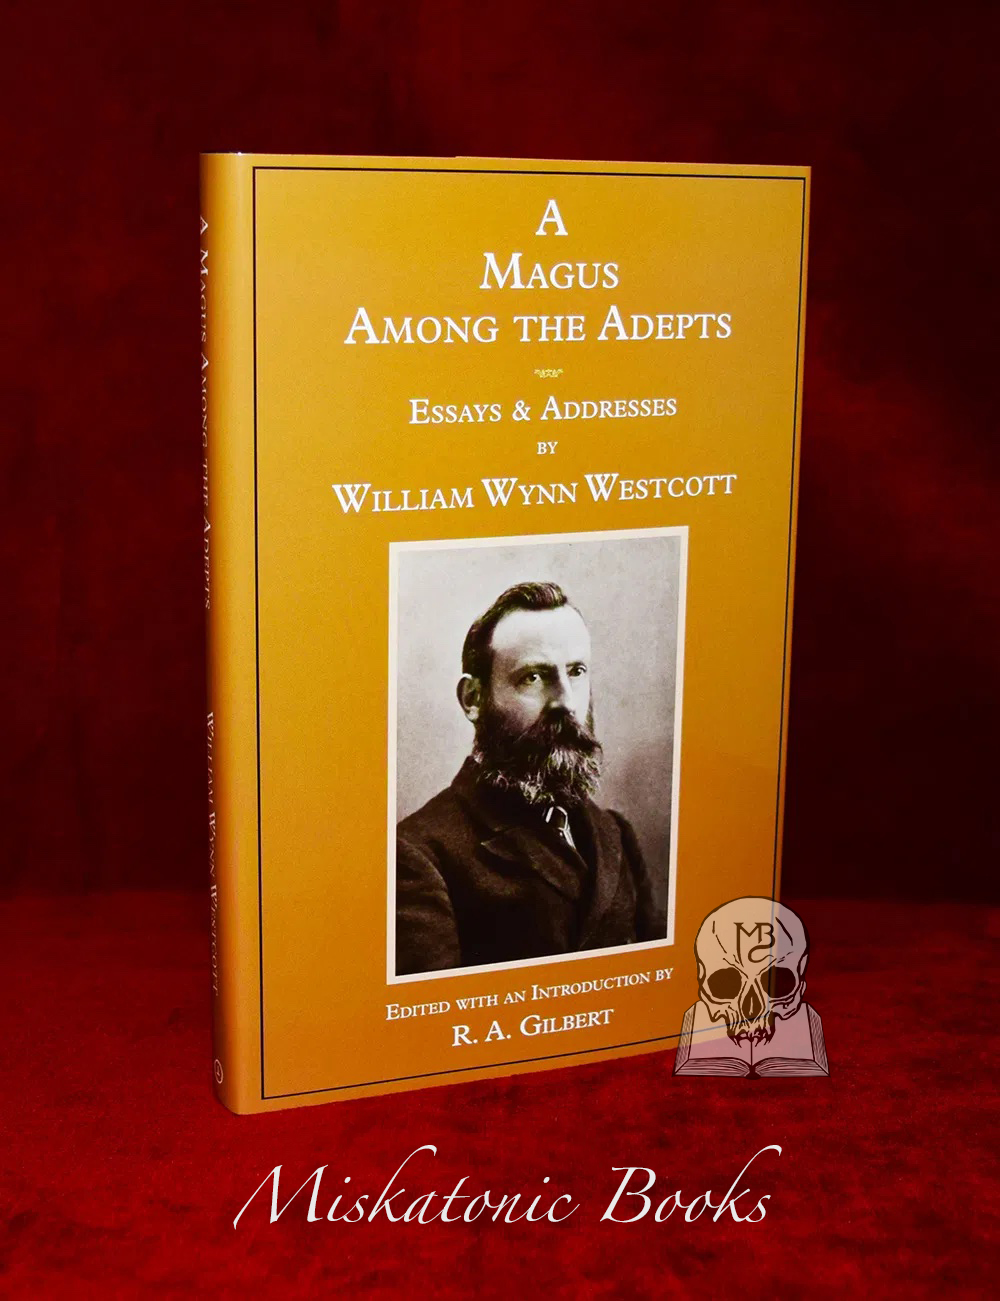 A MAGUS AMONG THE ADEPTS: Essays and Addresses by William Wynn Westcott (Limited Edition Hardcover)